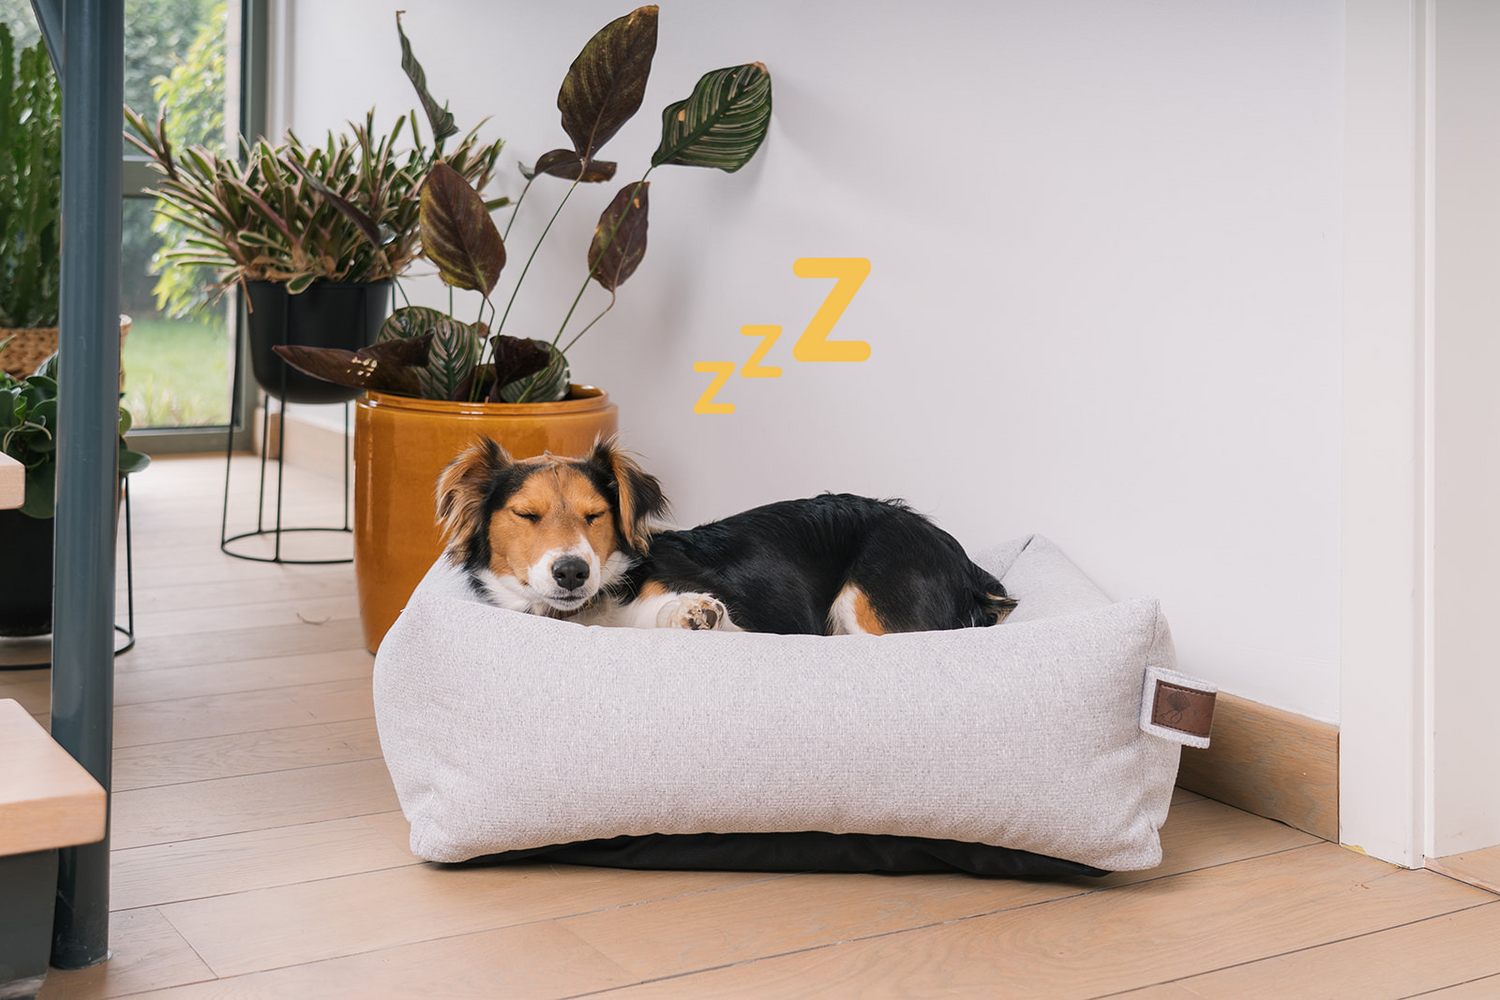 How much sleep does your dog need and why?